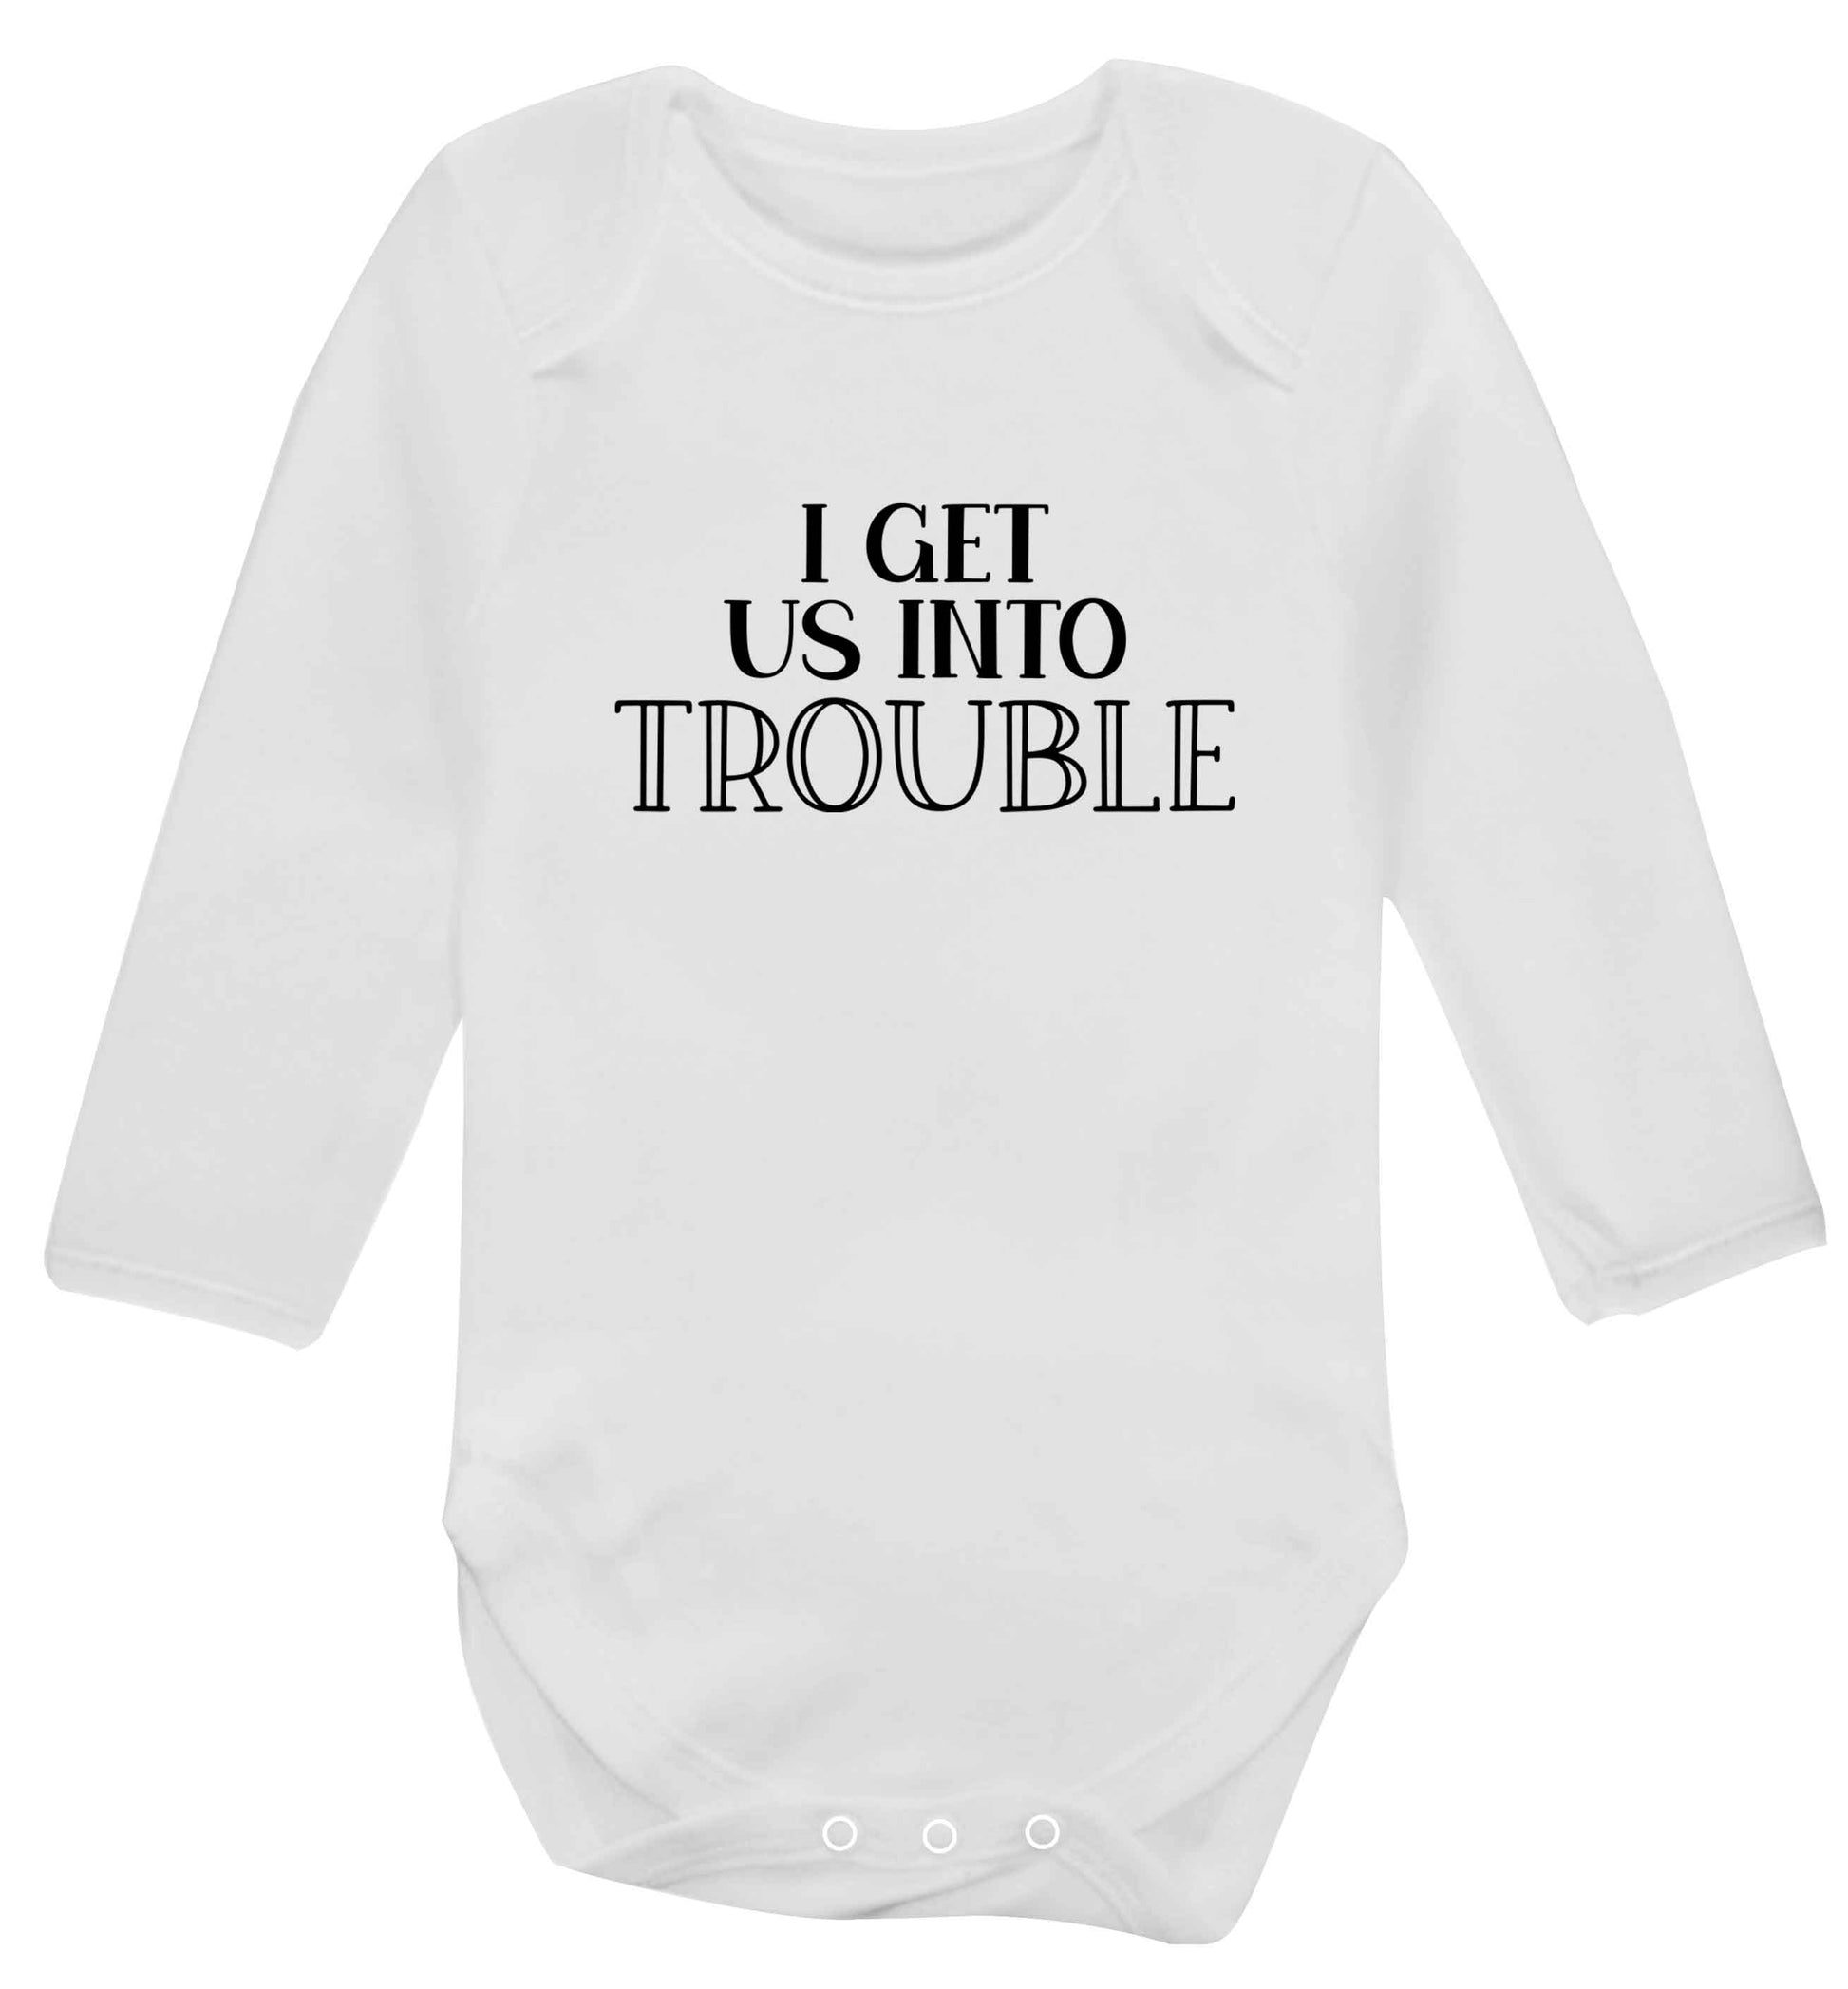 I get us into trouble baby vest long sleeved white 6-12 months